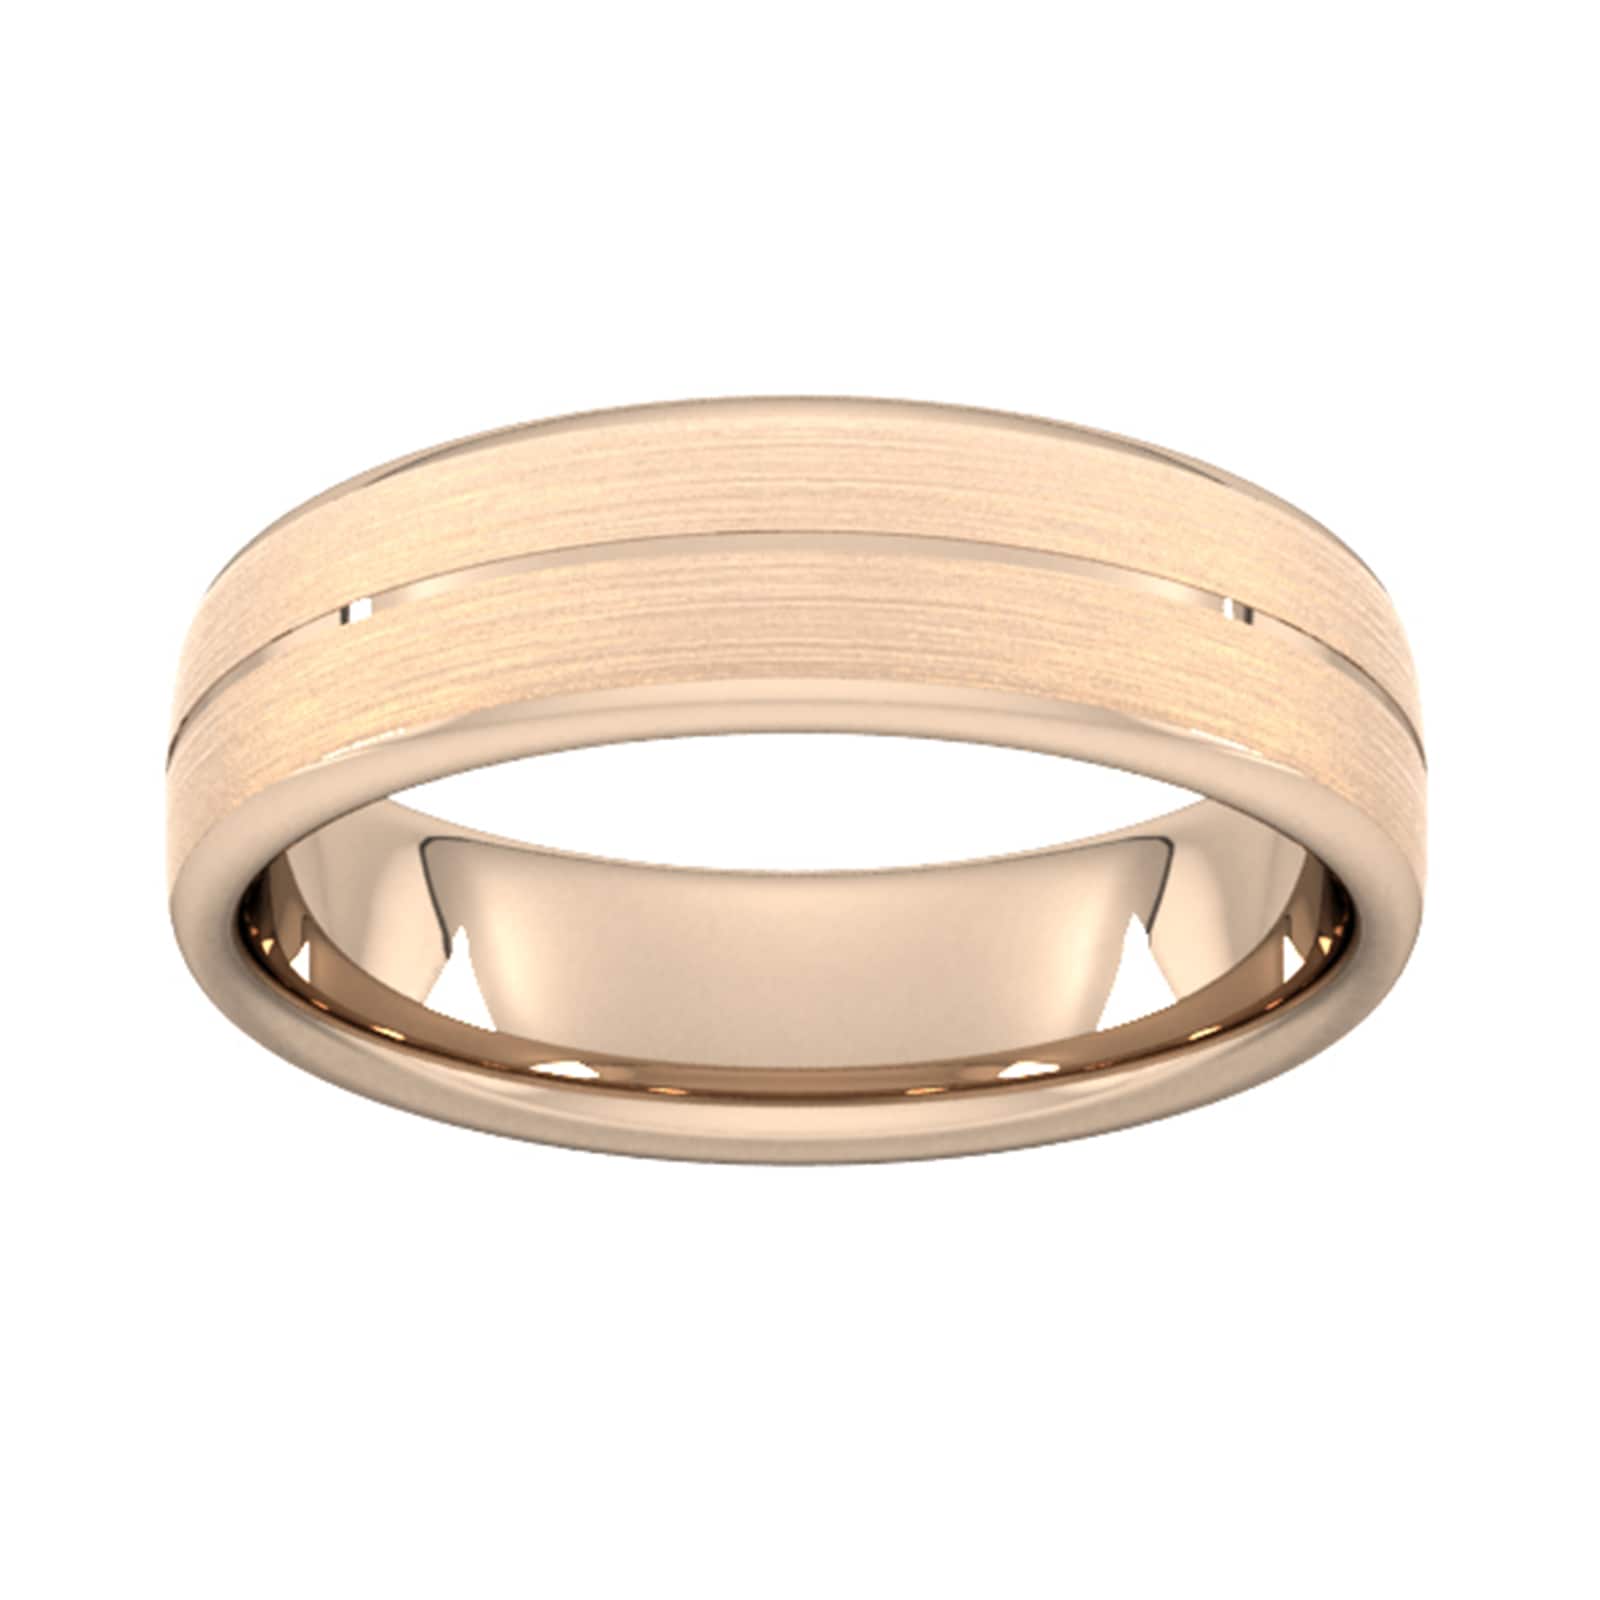 6mm Slight Court Heavy Centre Groove With Chamfered Edge Wedding Ring In 18 Carat Rose Gold - Ring Size R